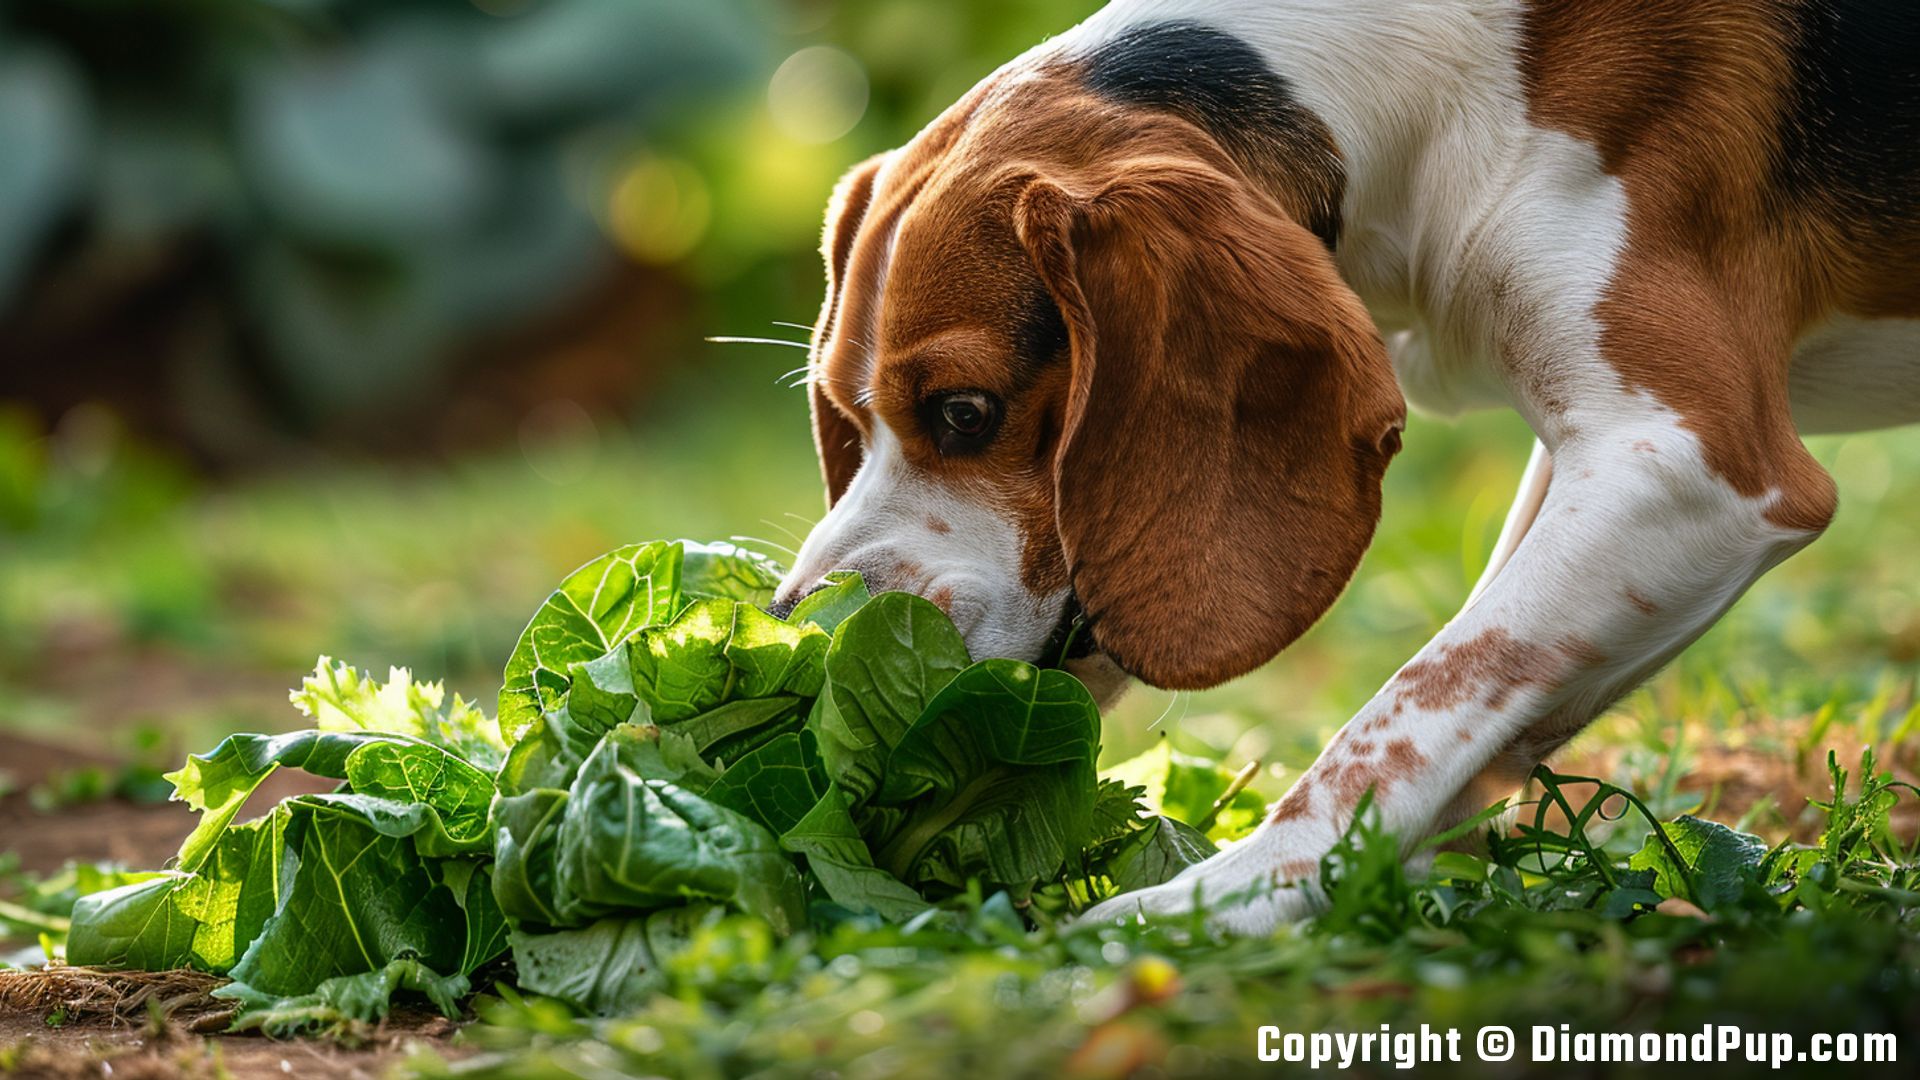 Photograph of a Cute Beagle Snacking on Lettuce